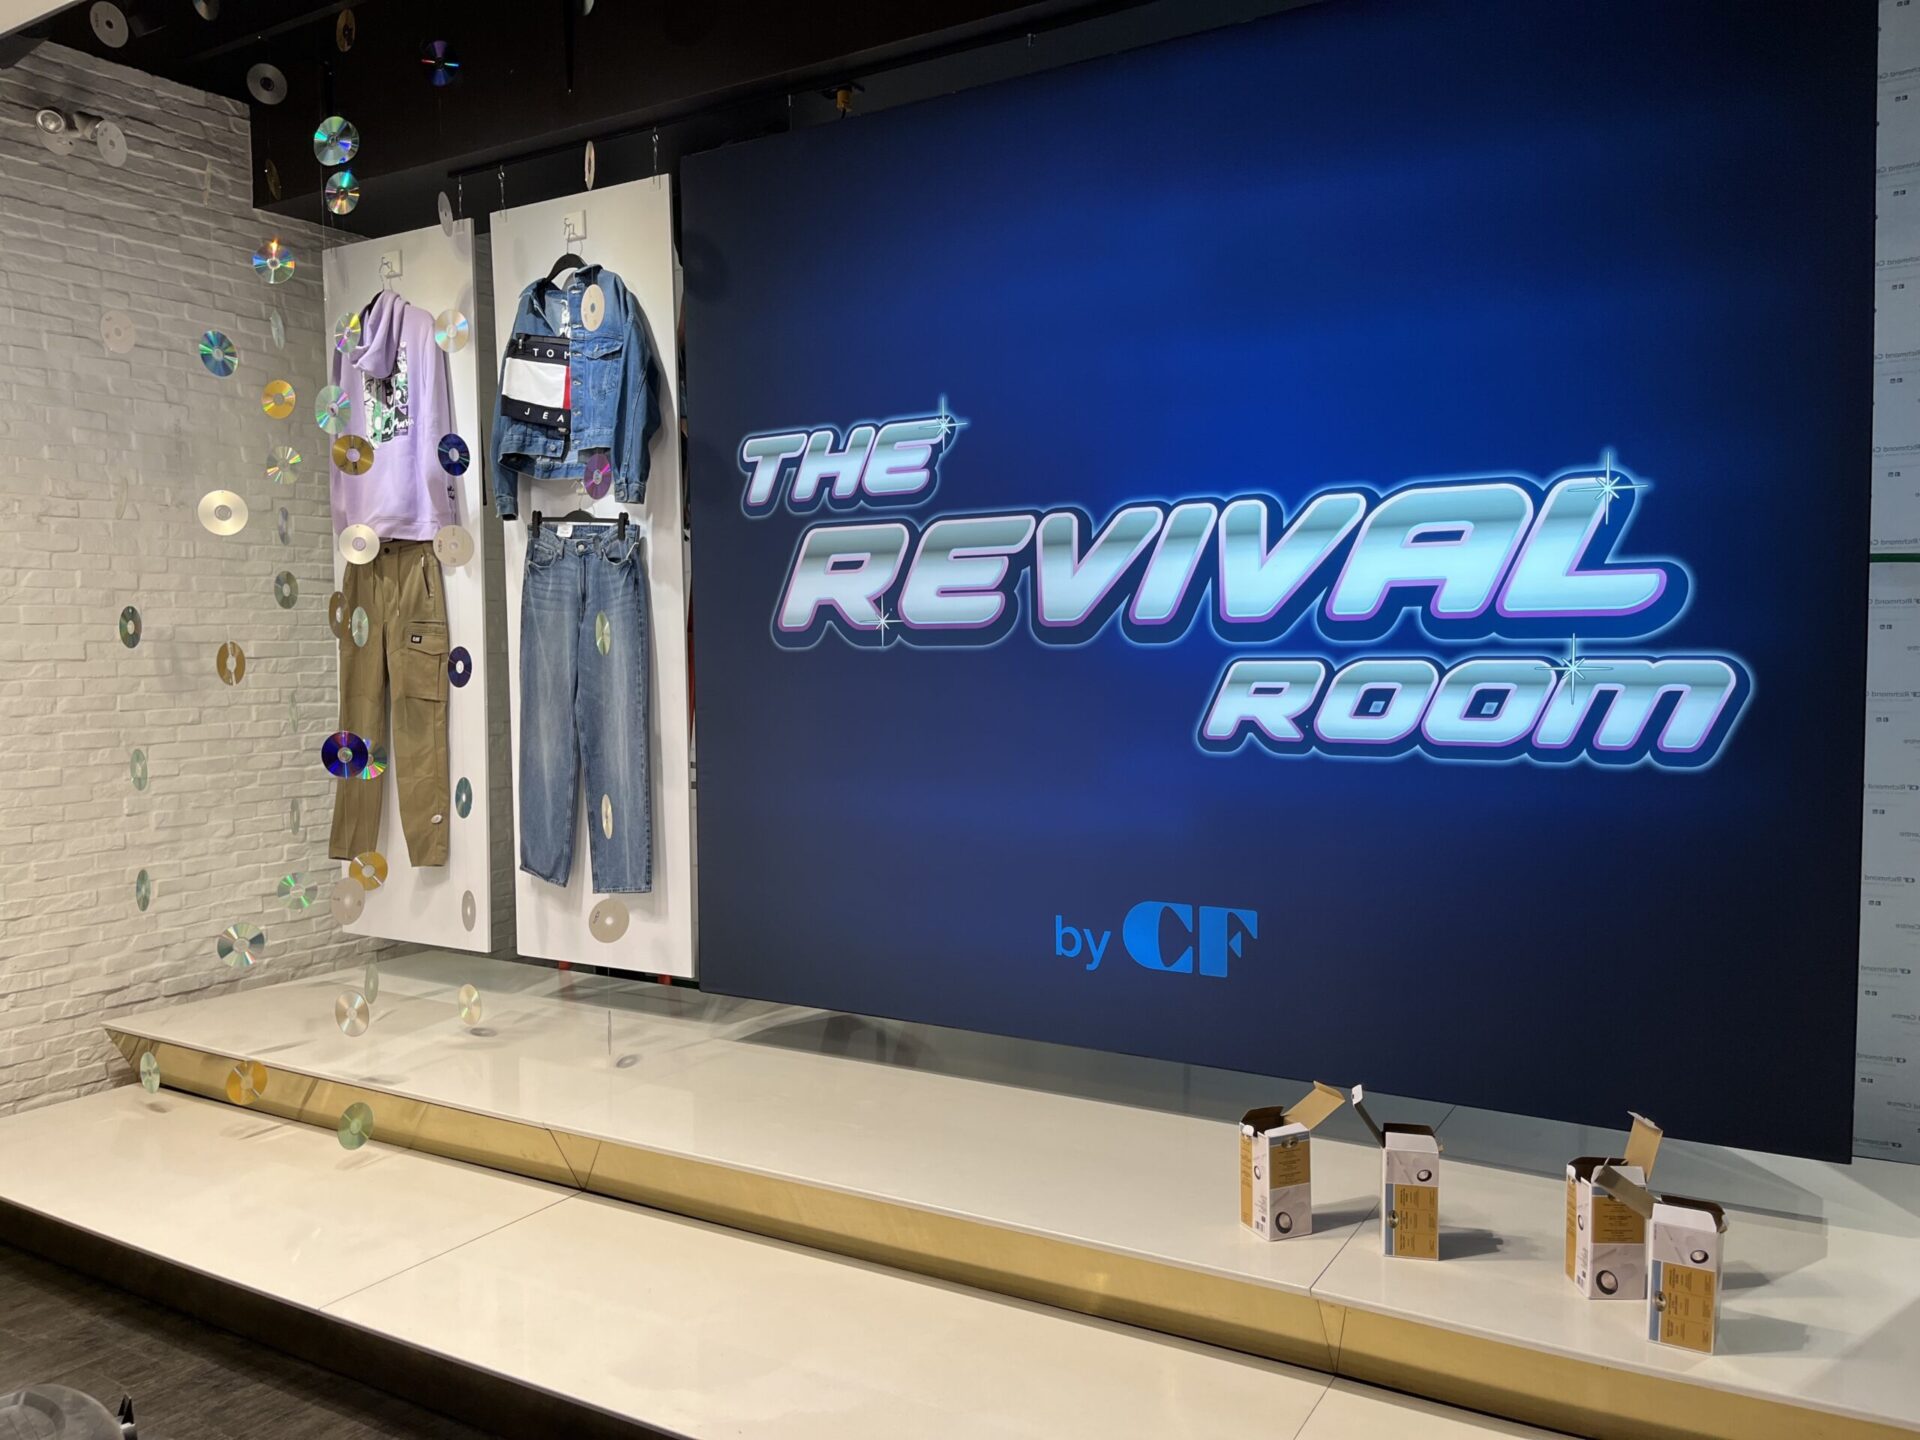 Cadilac Fairview 90s-influenced shopping experience with revival room wall